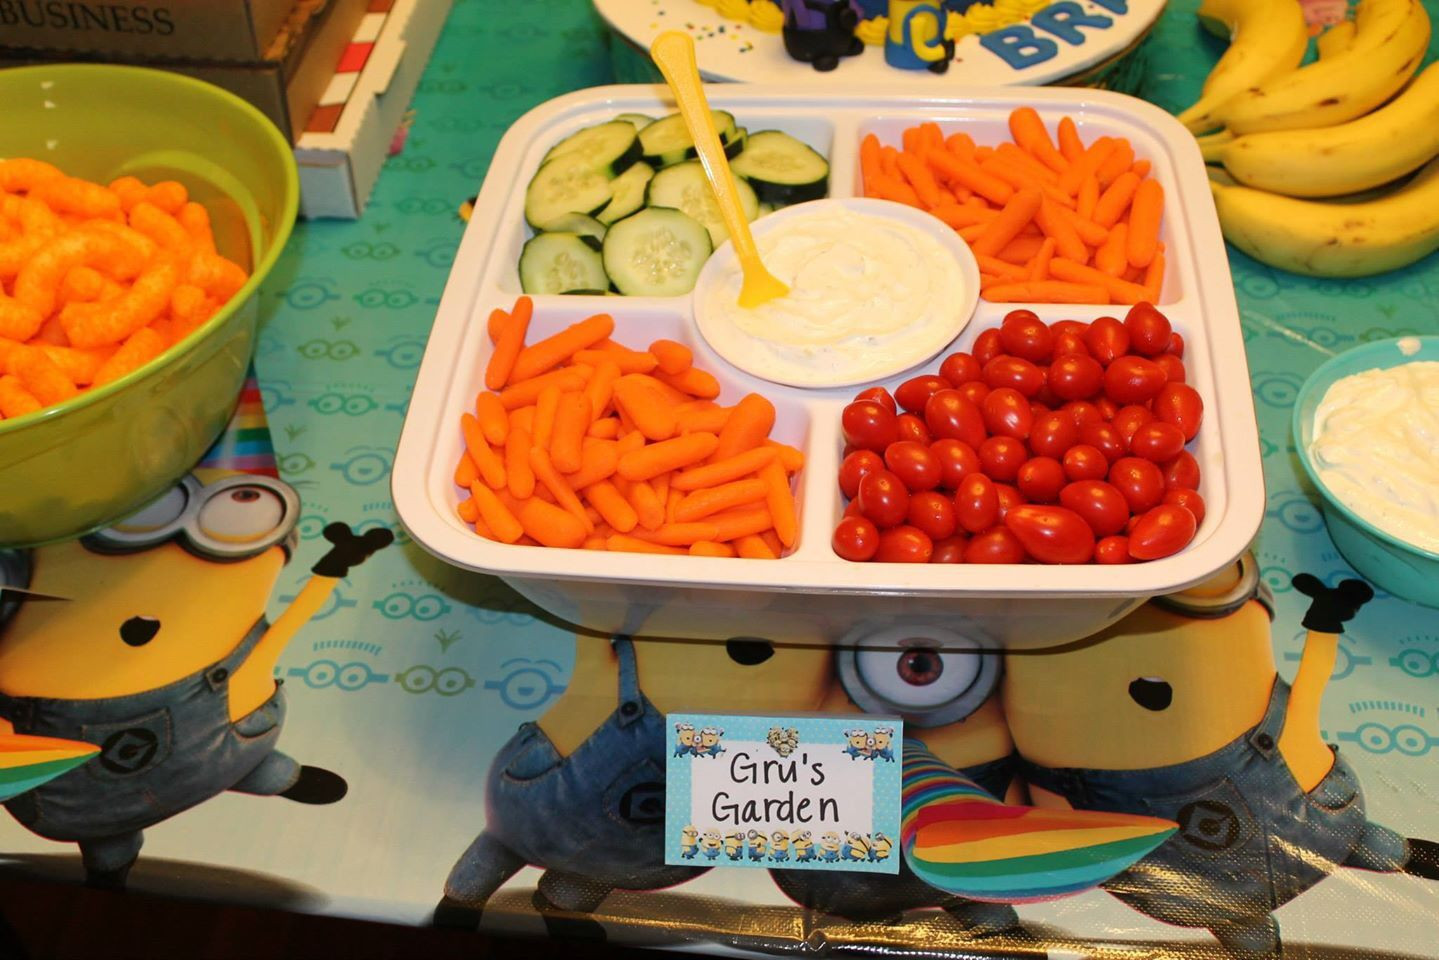 Despicable Me Party Food Ideas
 Food table Grus garden veggie tray minion party